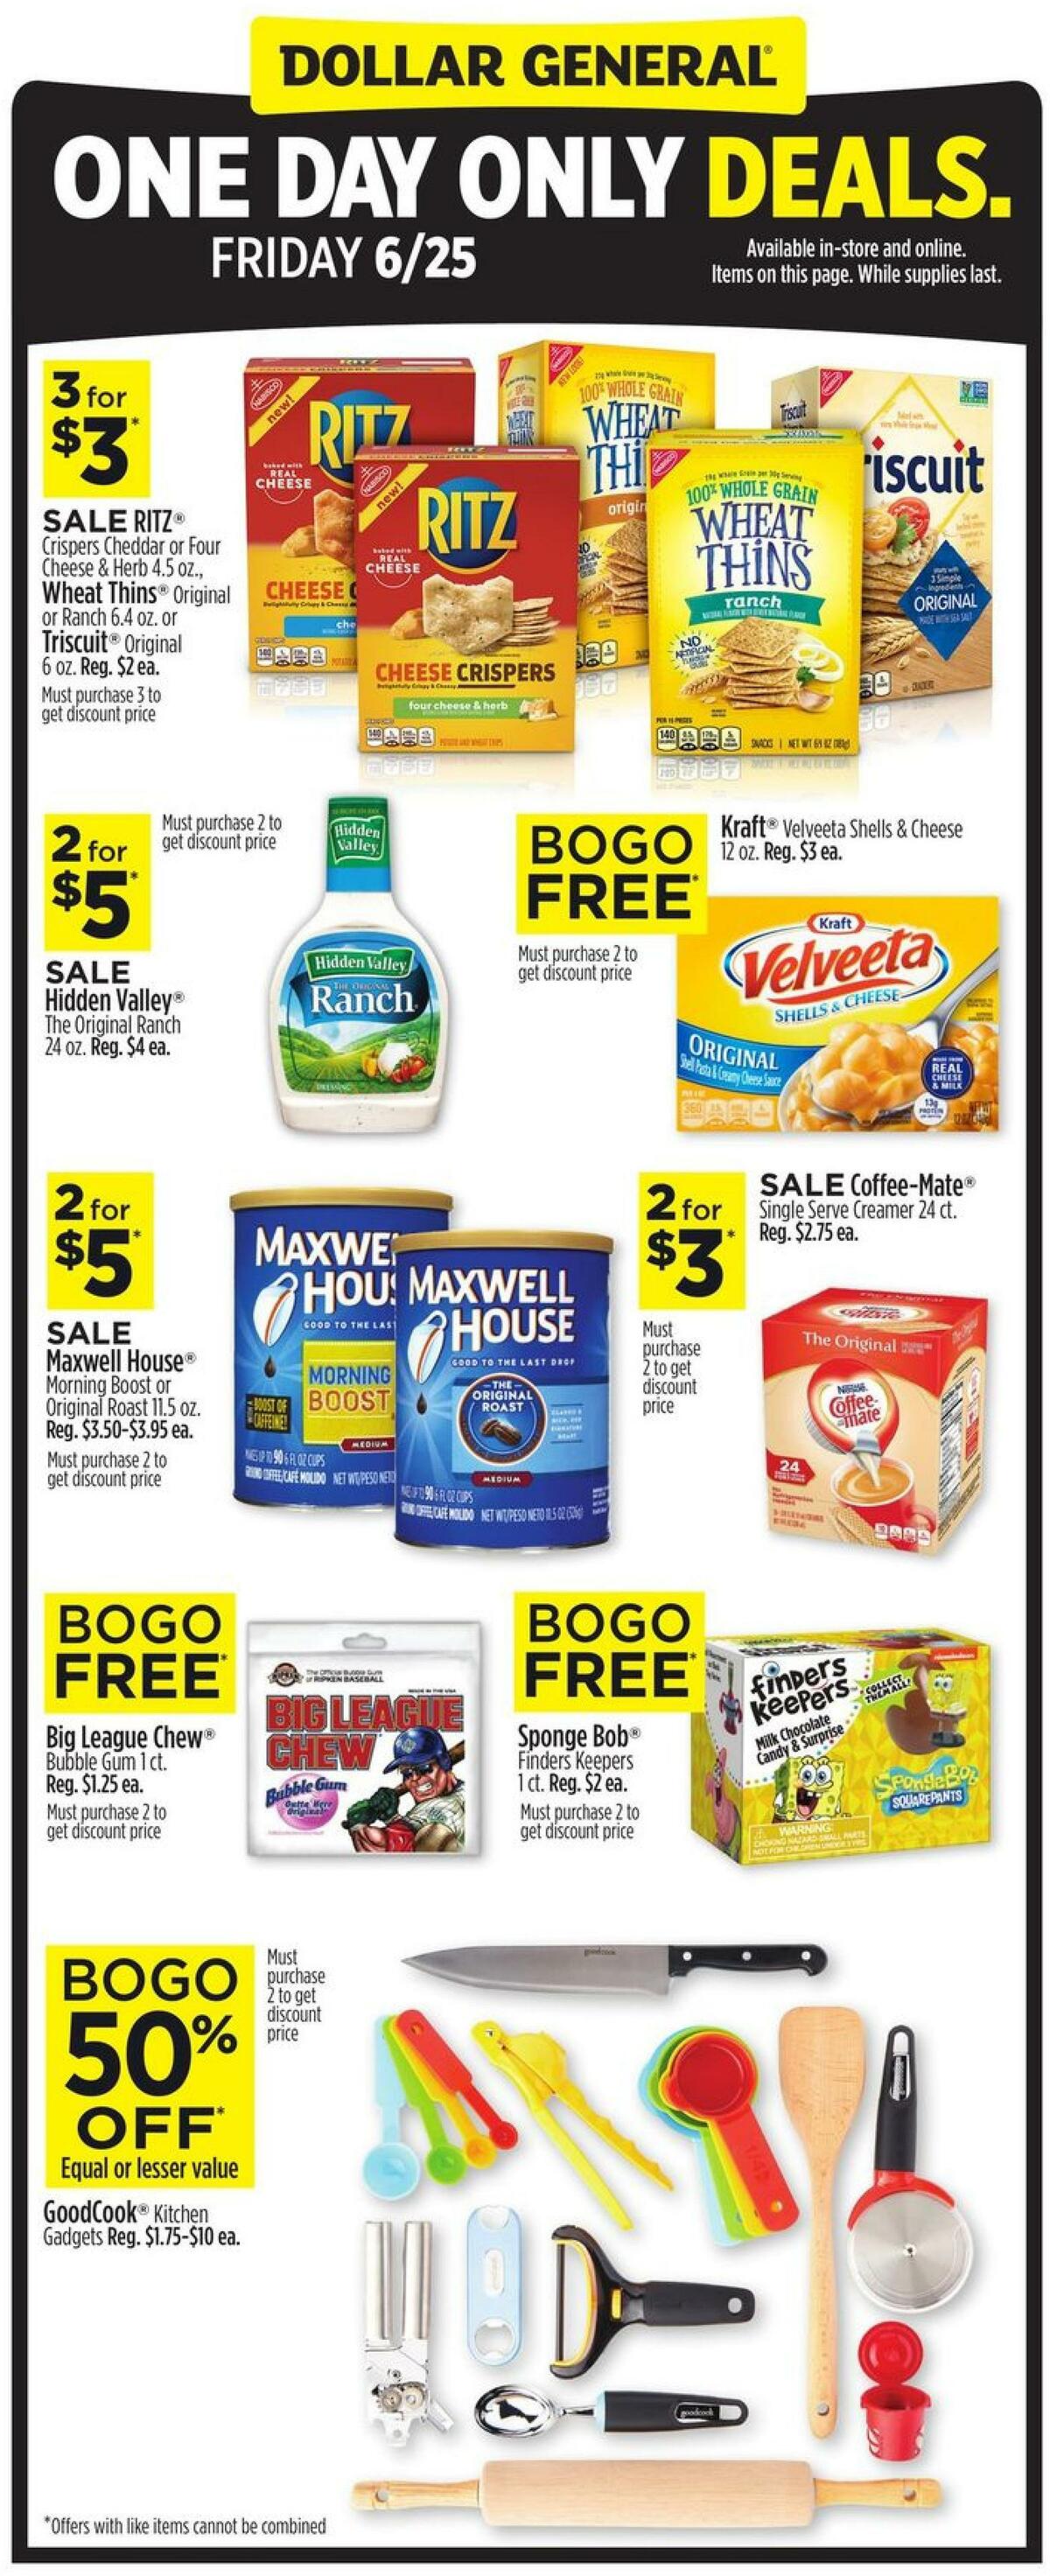 Dollar General One Day Only Deals Weekly Ad from June 25